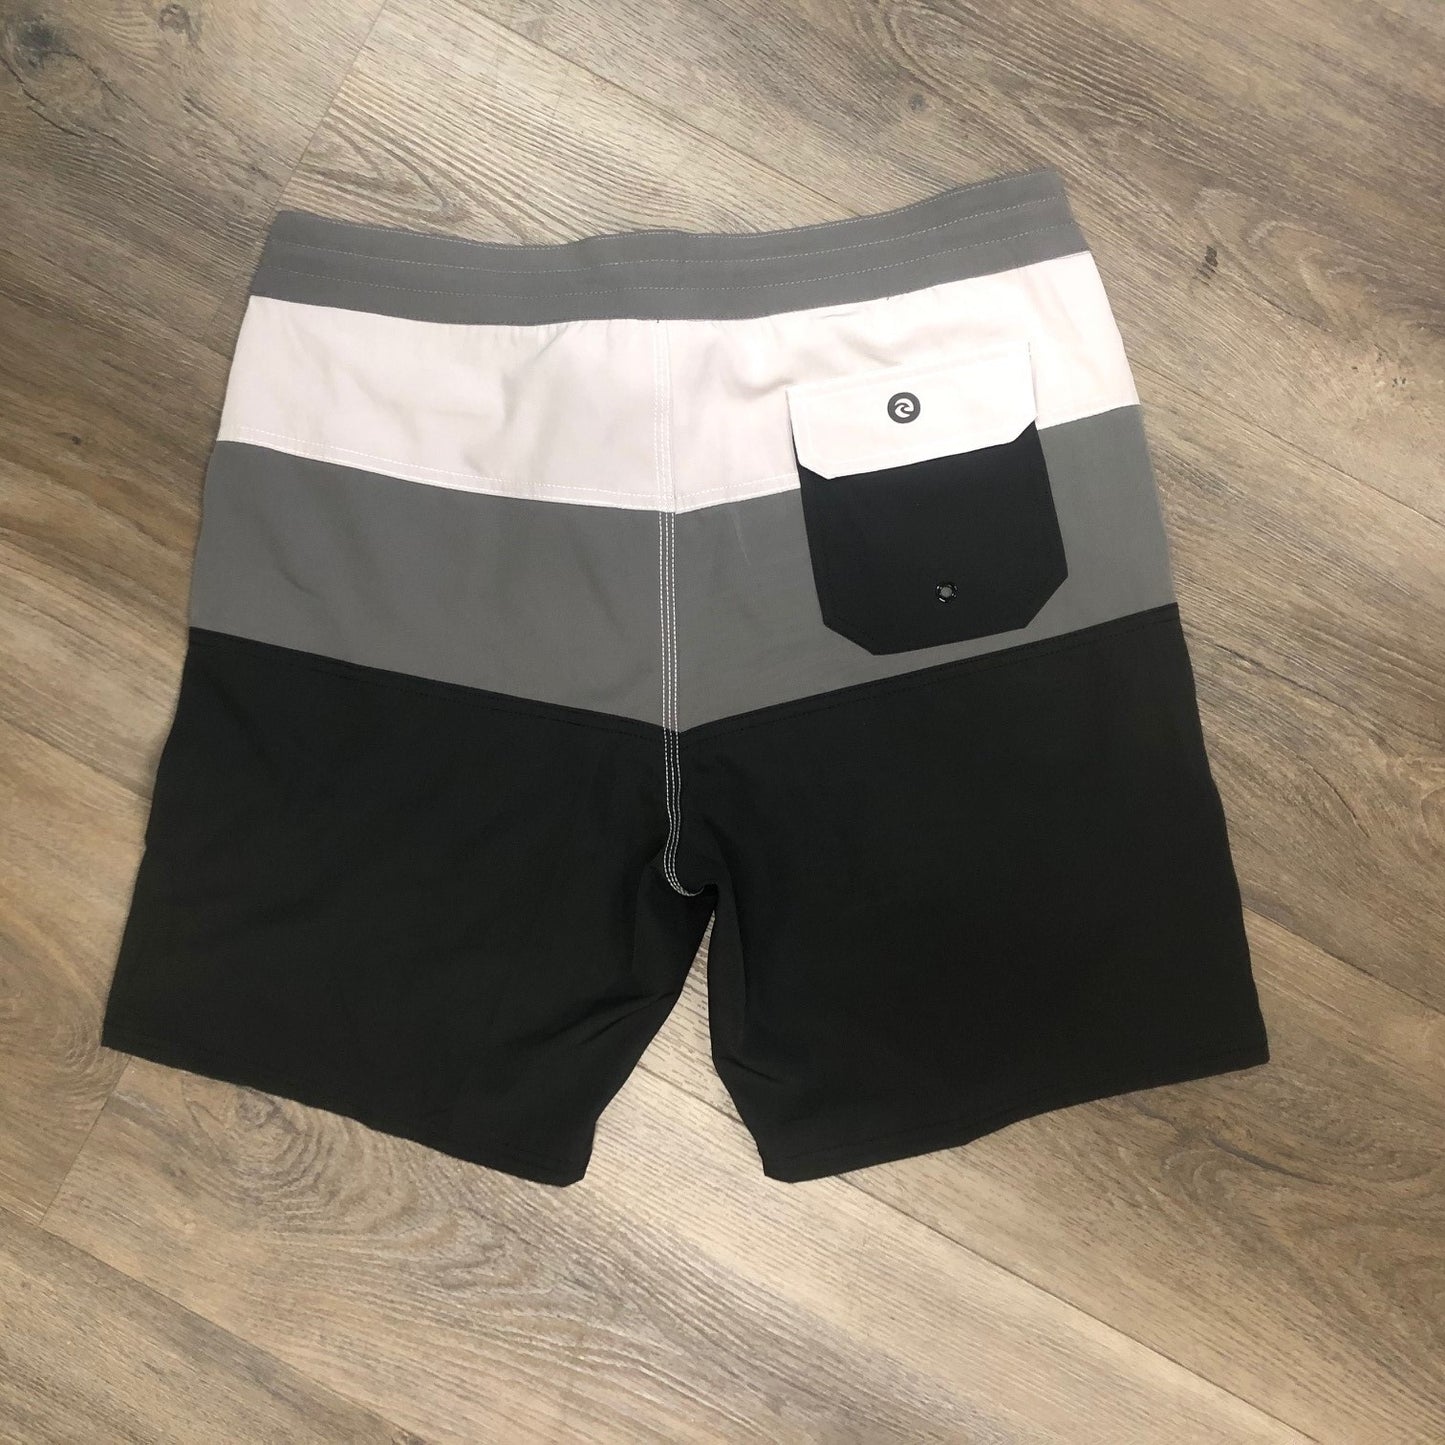 Surf World Triple Tail Boardshorts - The Surf World Collection - Black Mens Boardshorts